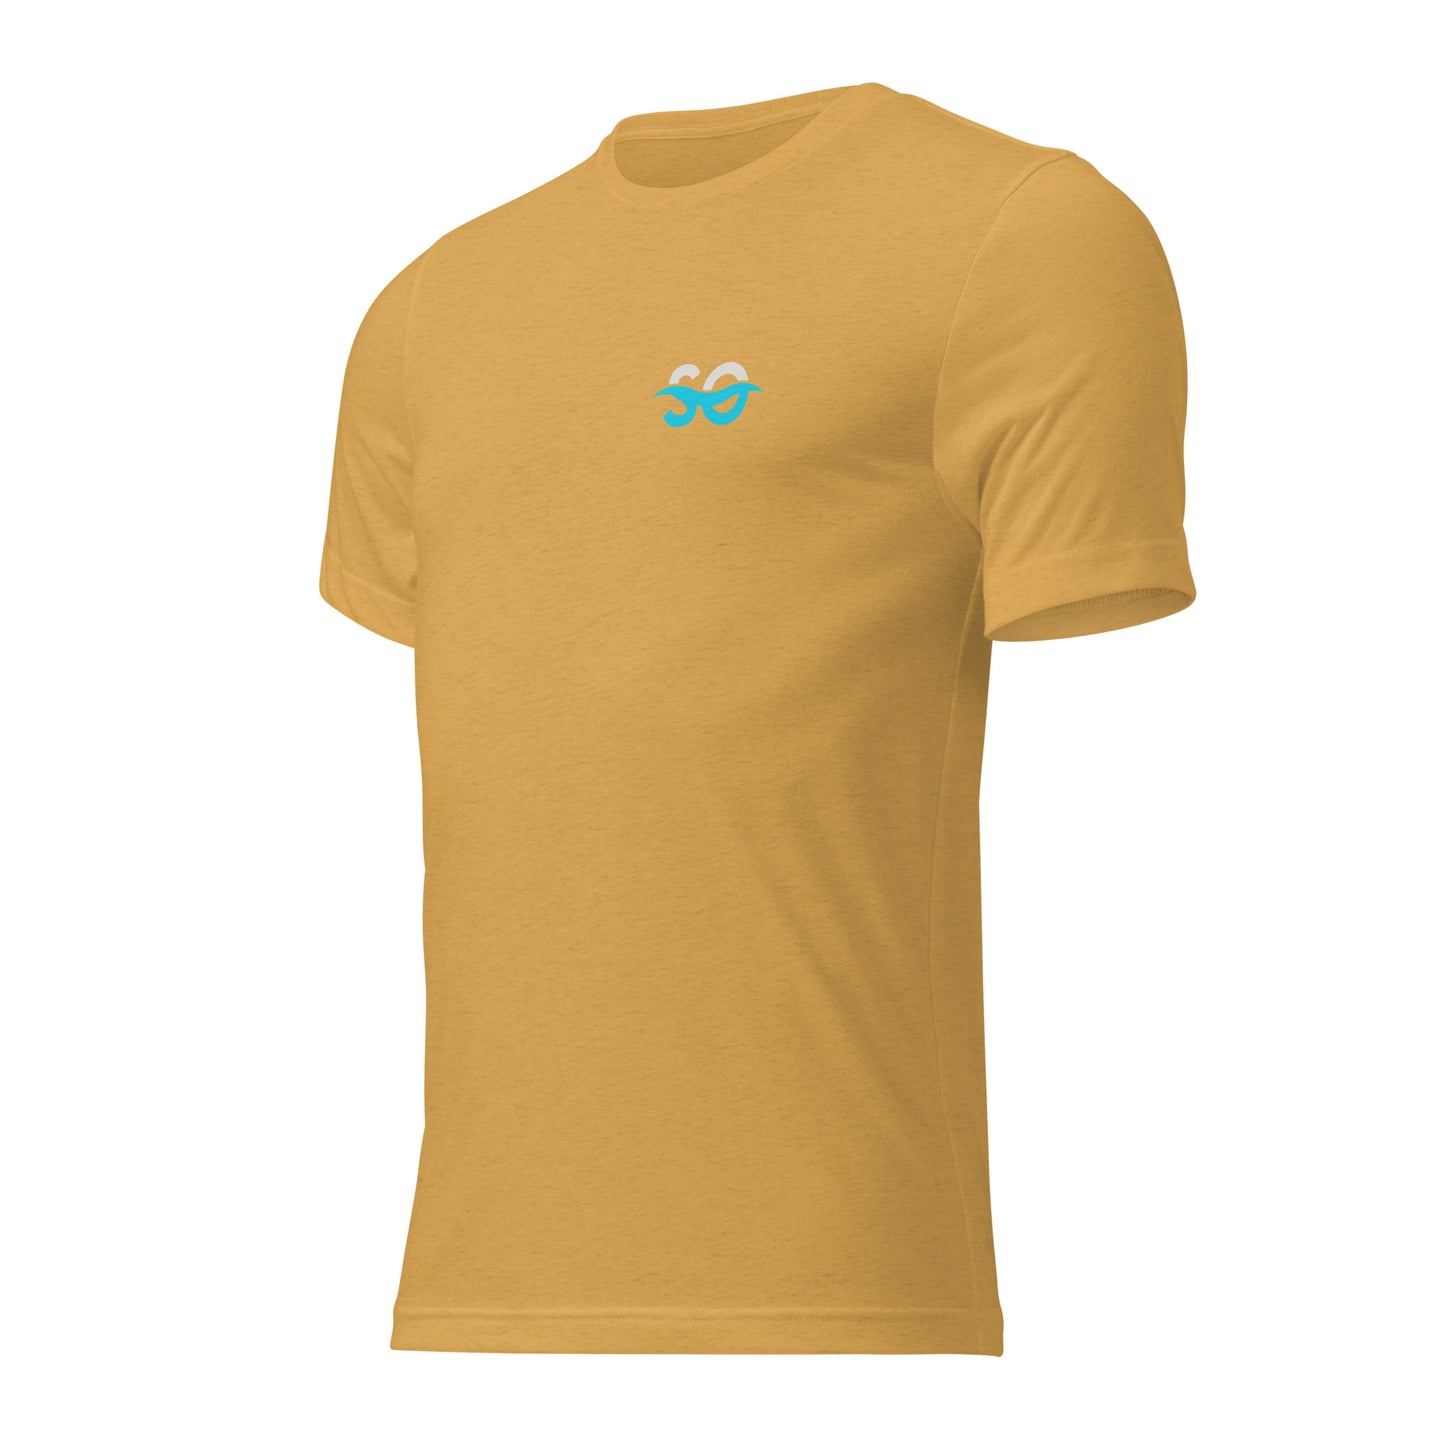 a yellow t - shirt with a blue bird on it